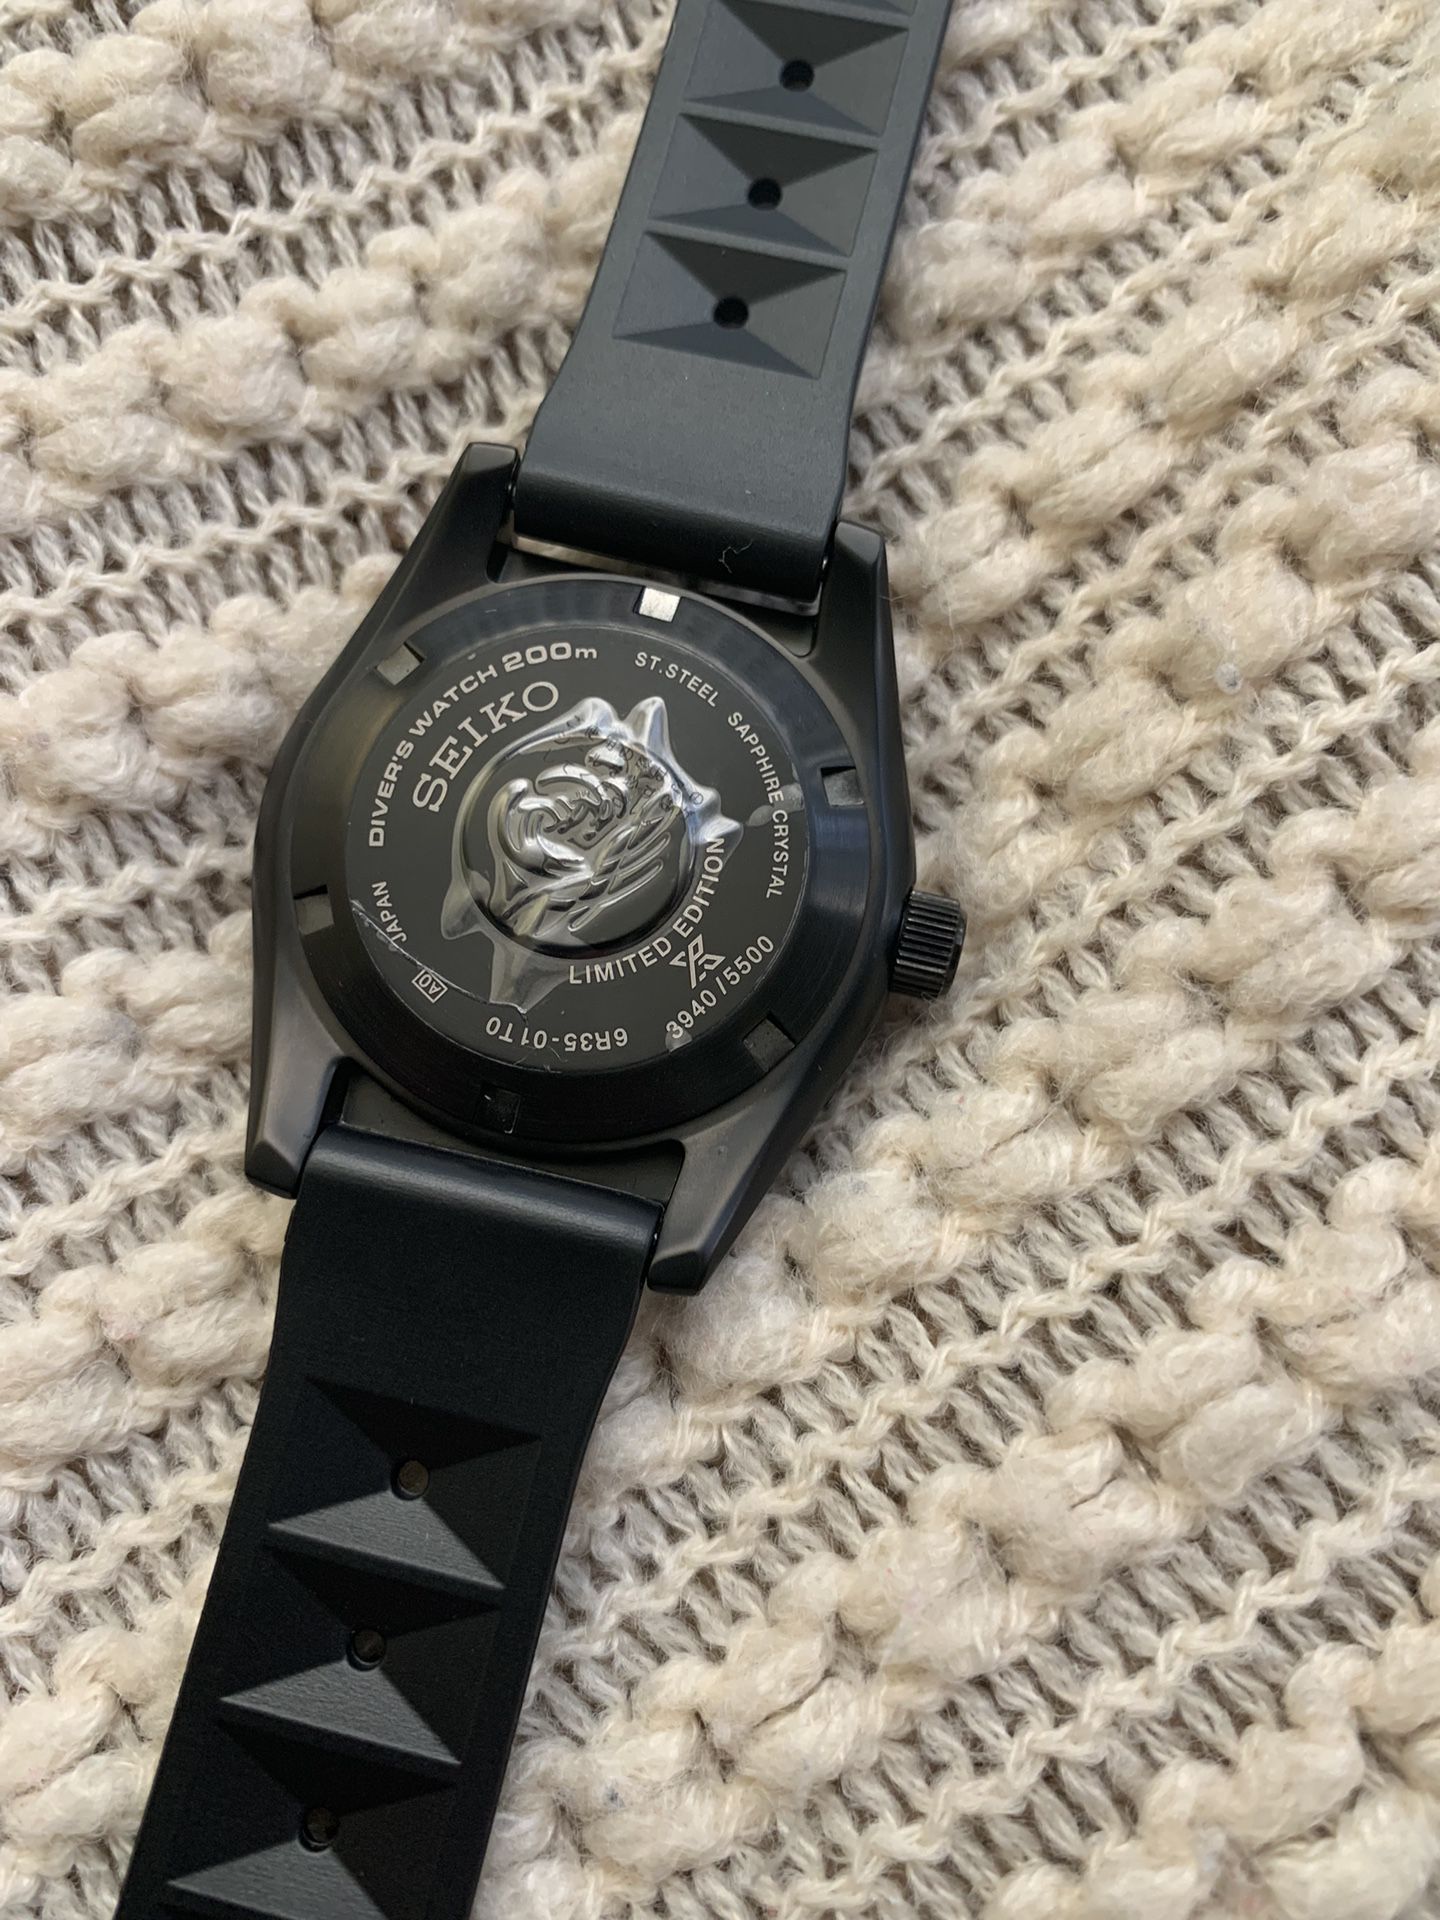 SEIKO, Prospex, SPB 253, Black Series, Limited Edition for Sale in Windsor  Hills, CA - OfferUp